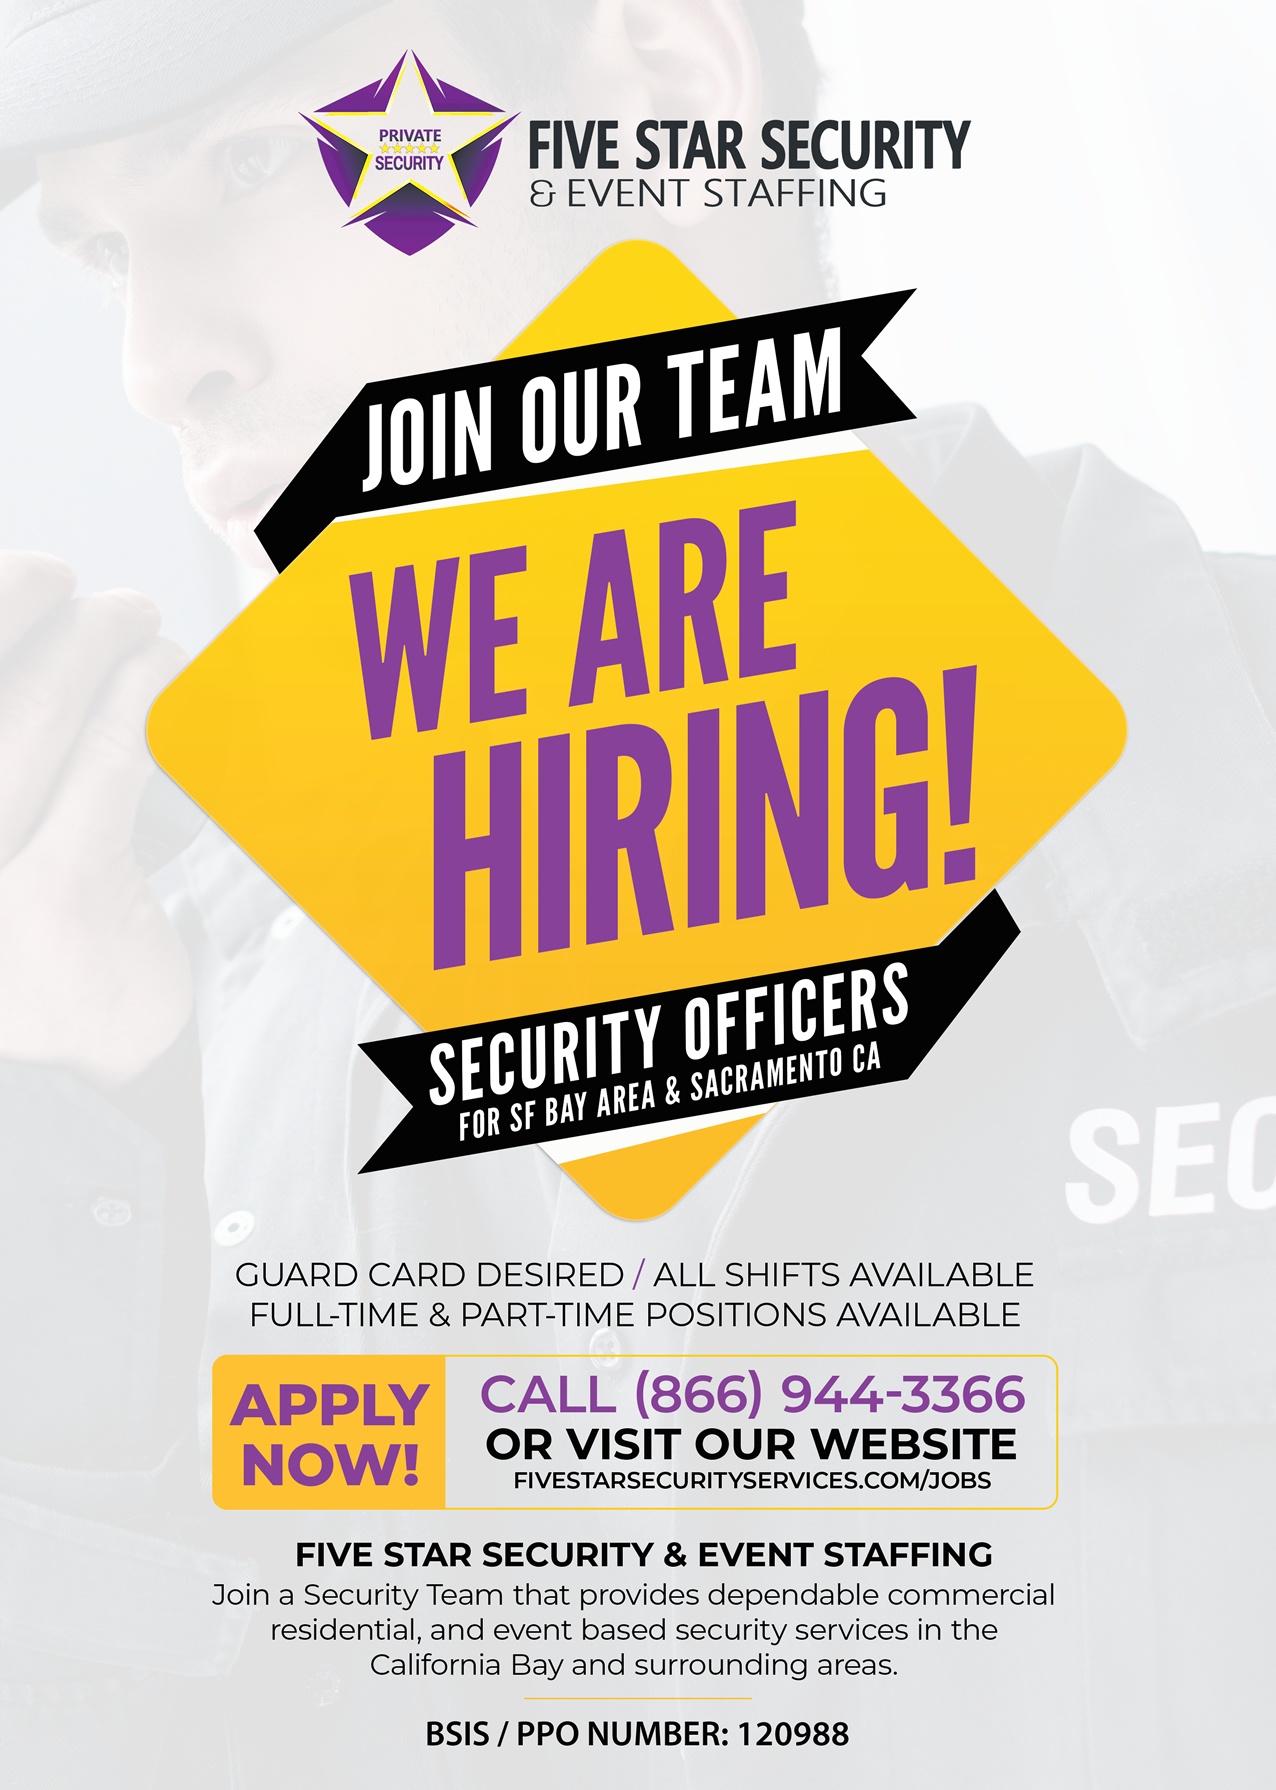 Five Star Security & Event Staffing - Sacramento CA | We Are Hiring Flyer - Security Officers